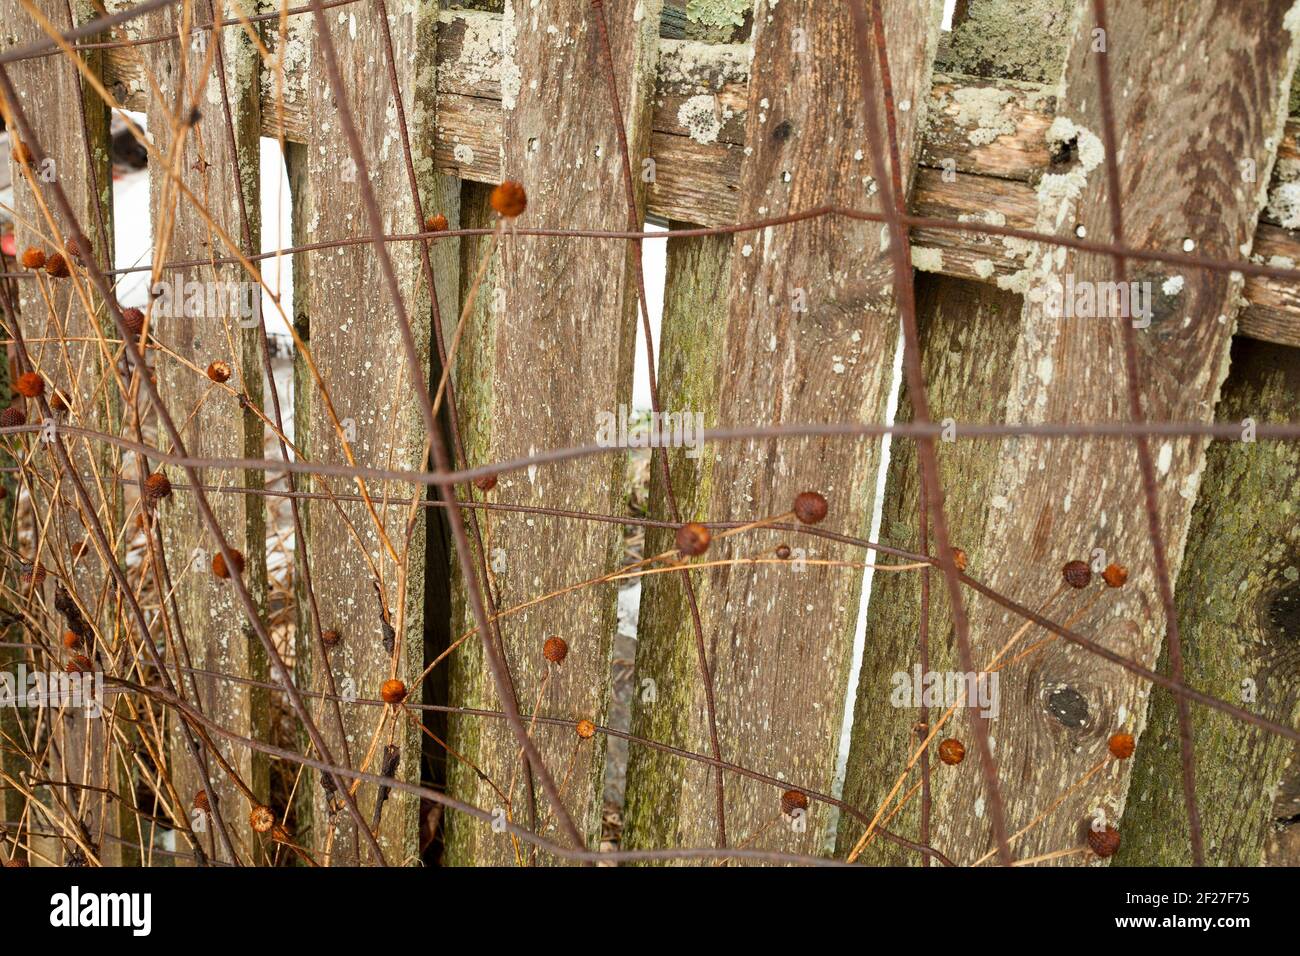 Wooden and metal fence in a New England community garden in the winter. Stock Photo